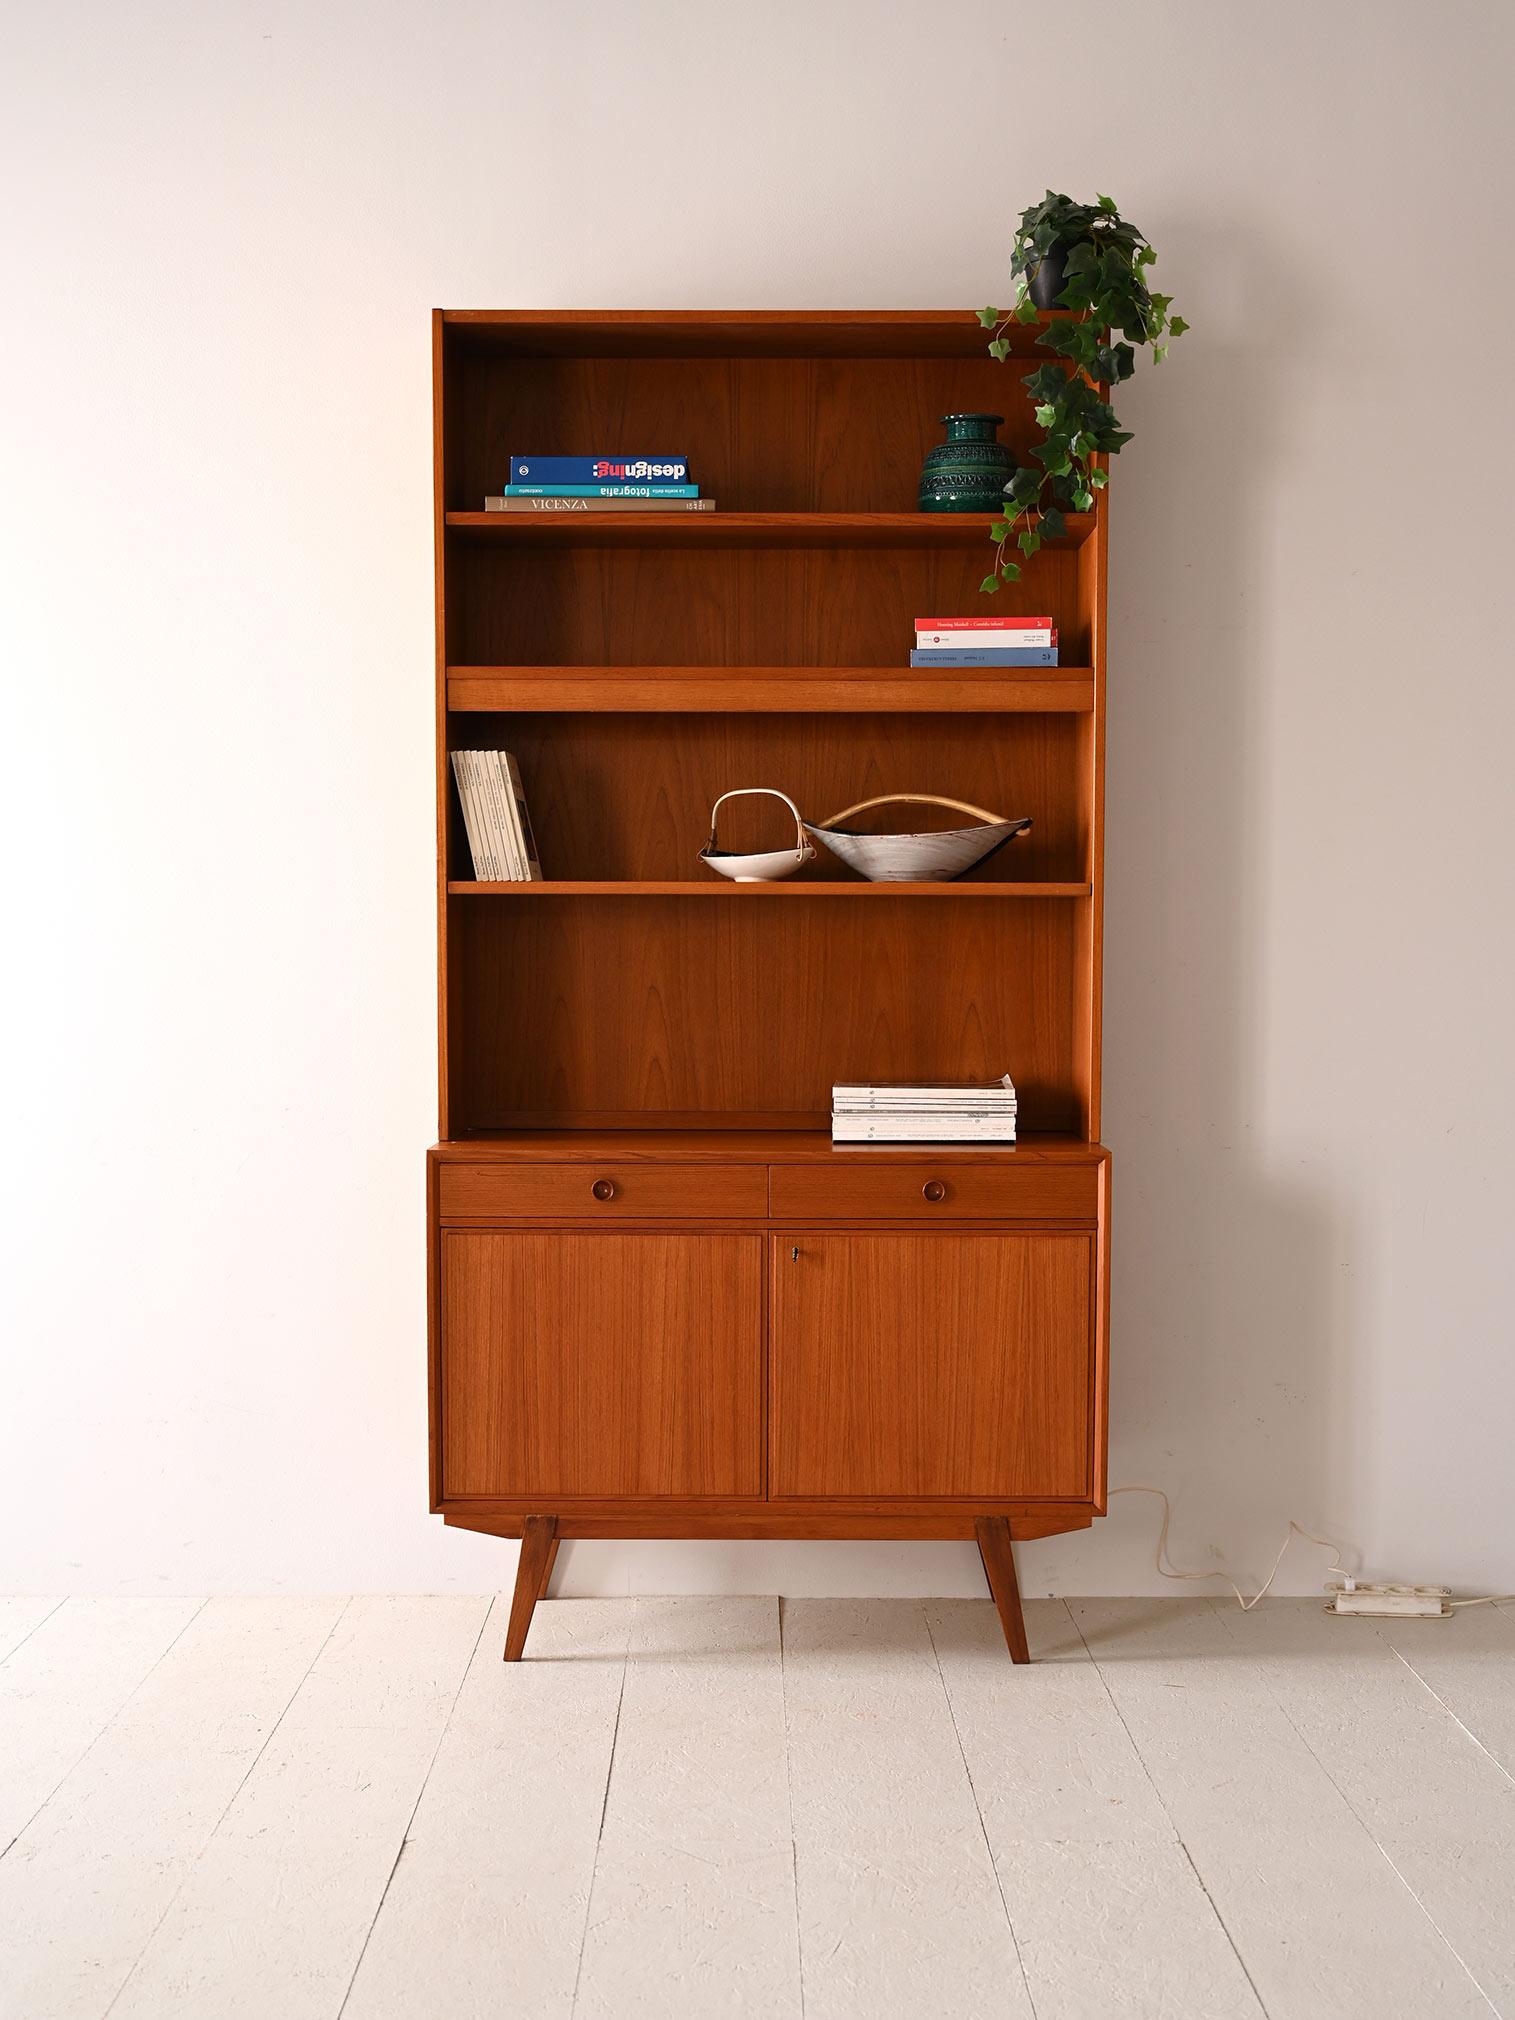 This Scandinavian teak wood bookcase, dating from the mid-century design period, offers a combination of aesthetics and functionality. At the top, three spacious shelves are illuminated by a central light point, creating an ideal display for